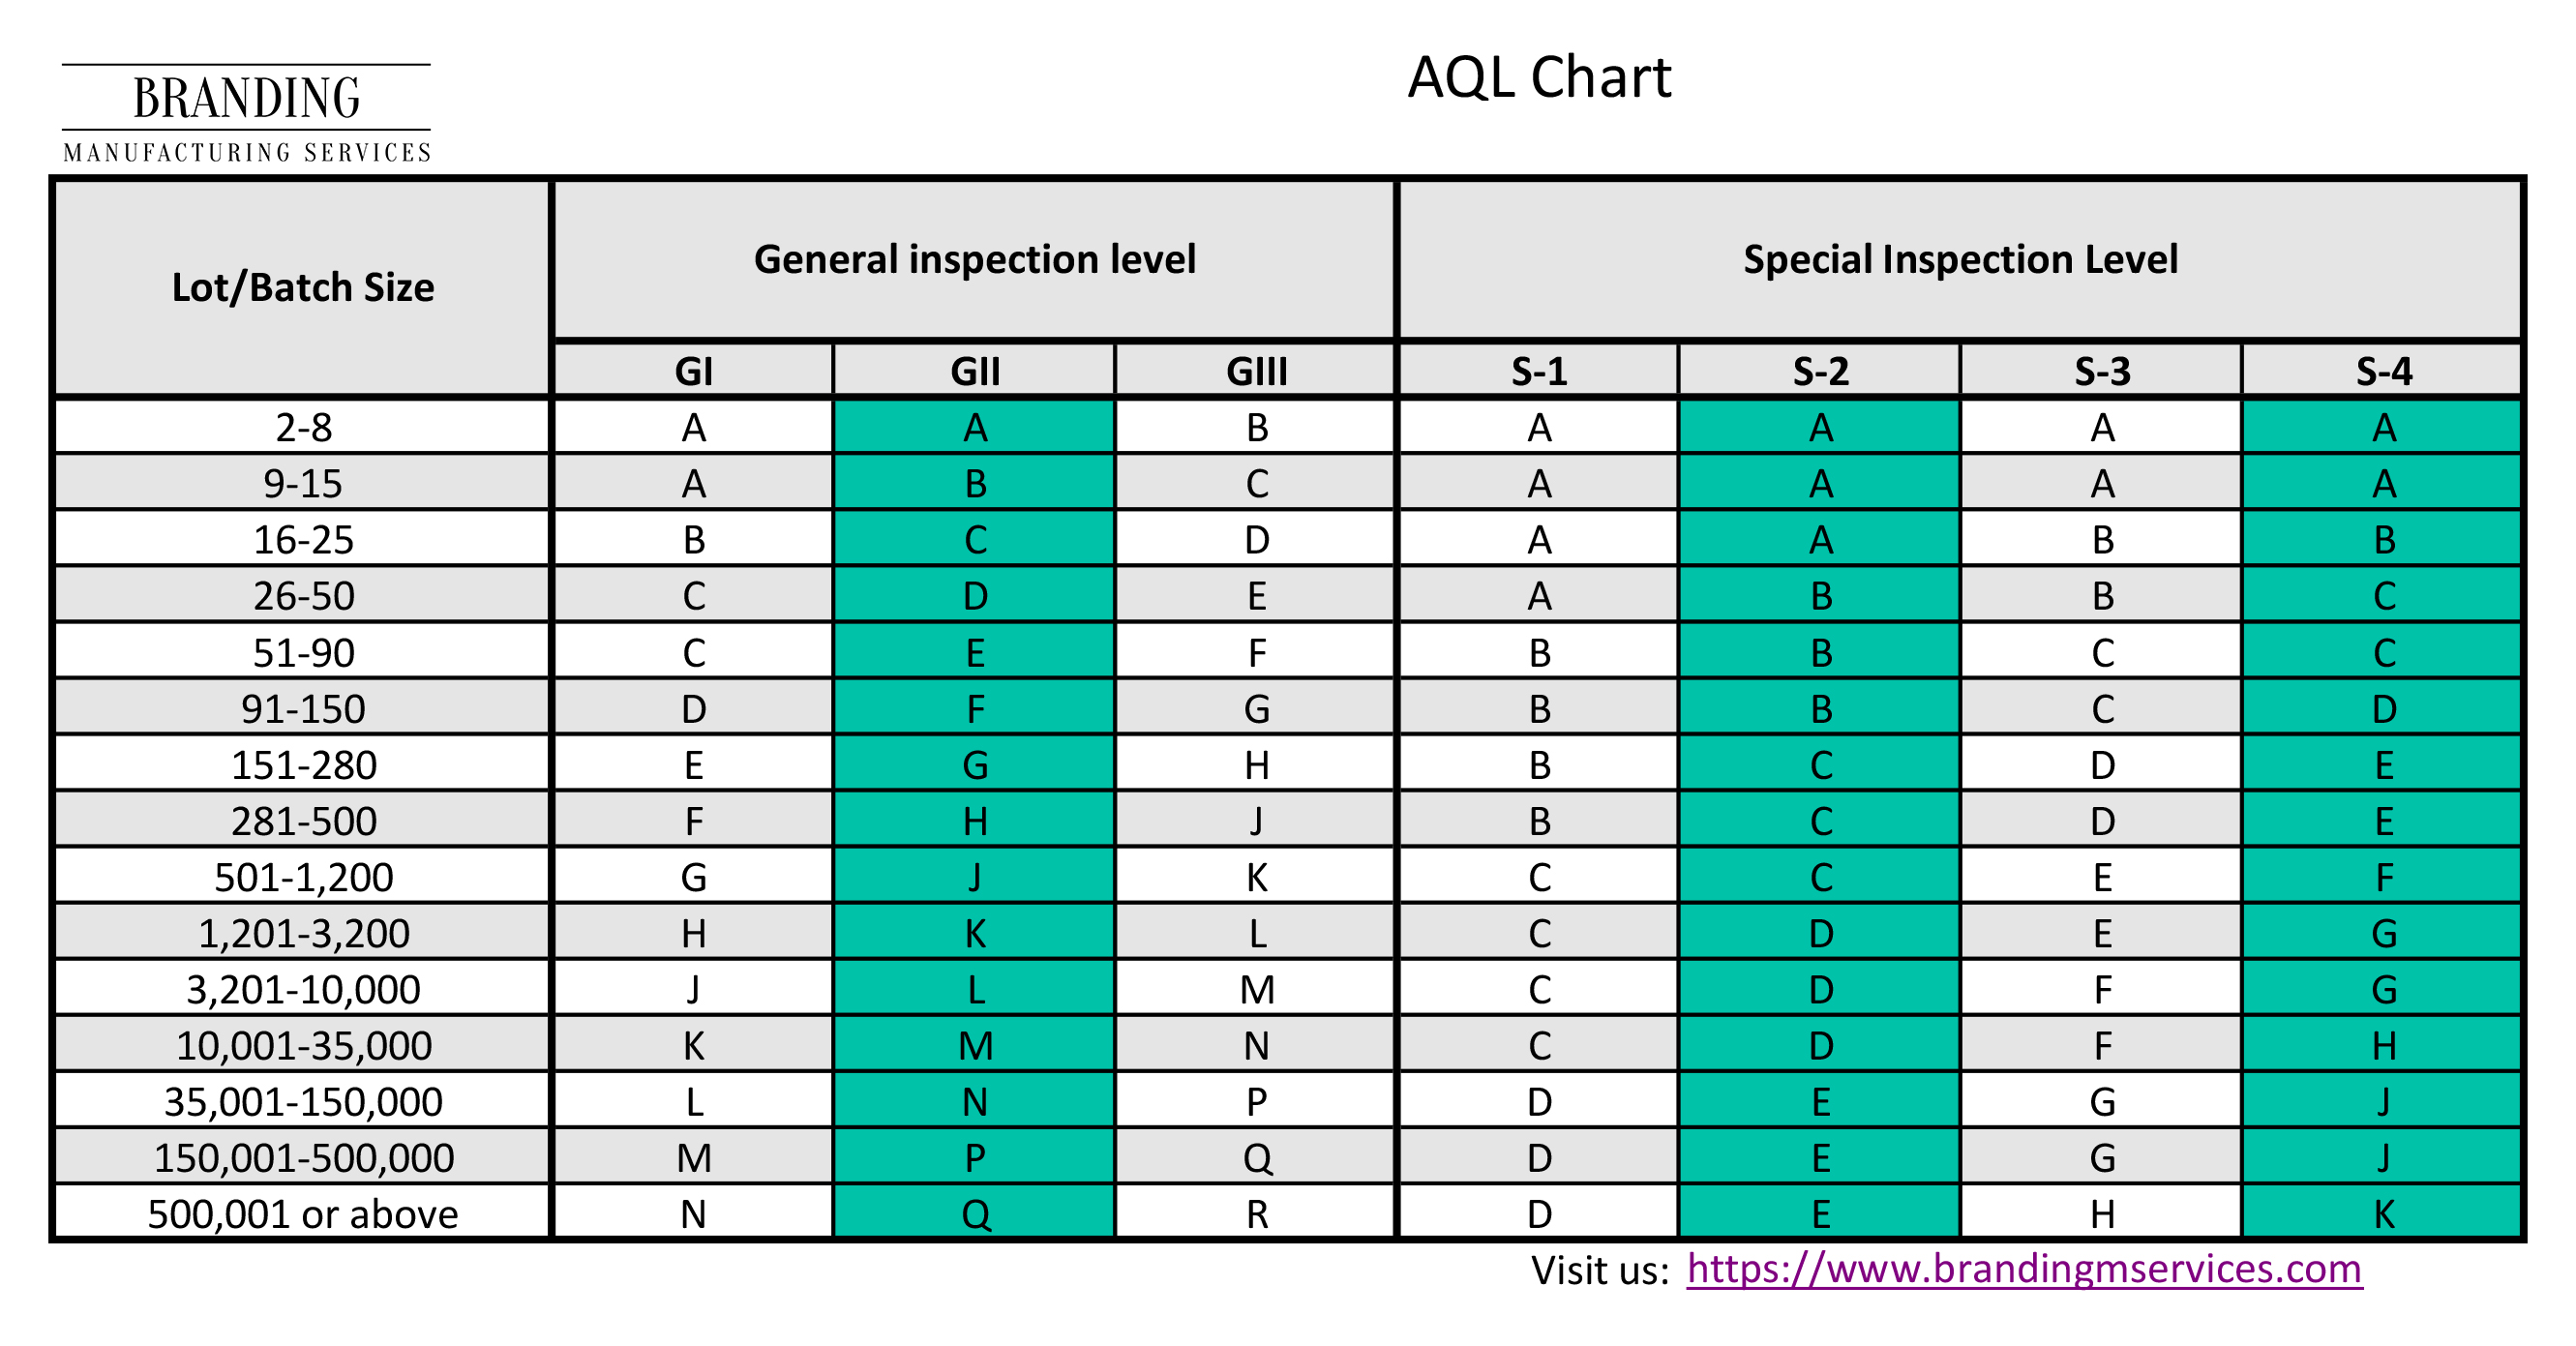 AQL CHART FRONT